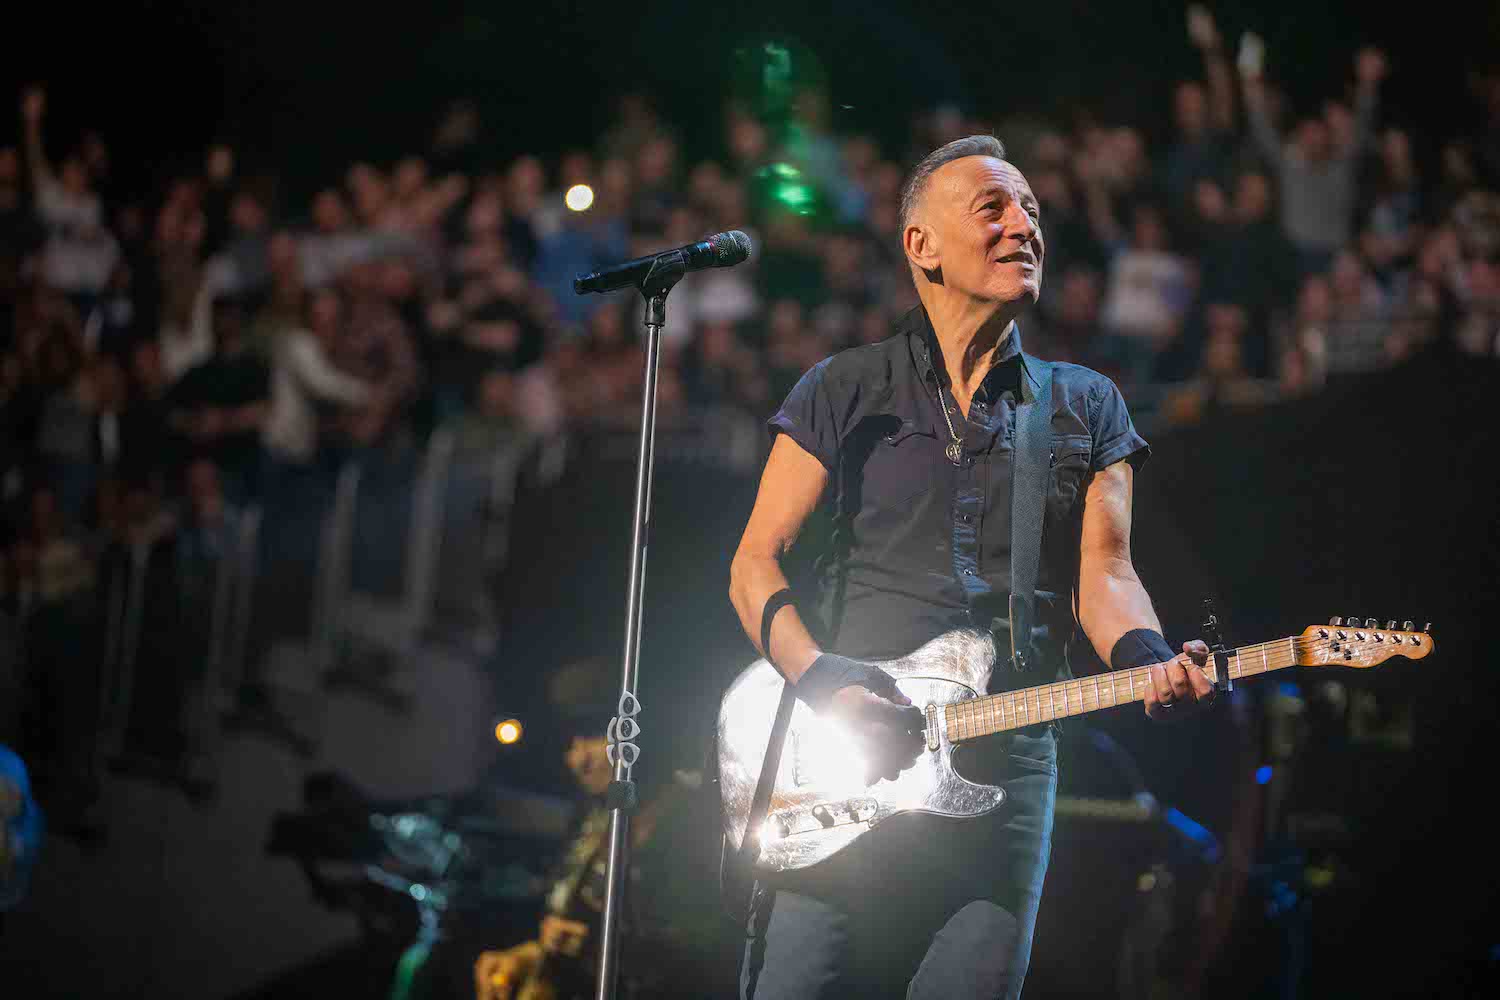 Bruce Springsteen & E Street Band at UBS Arena, Belmont Park, NY on April 11, 2023.